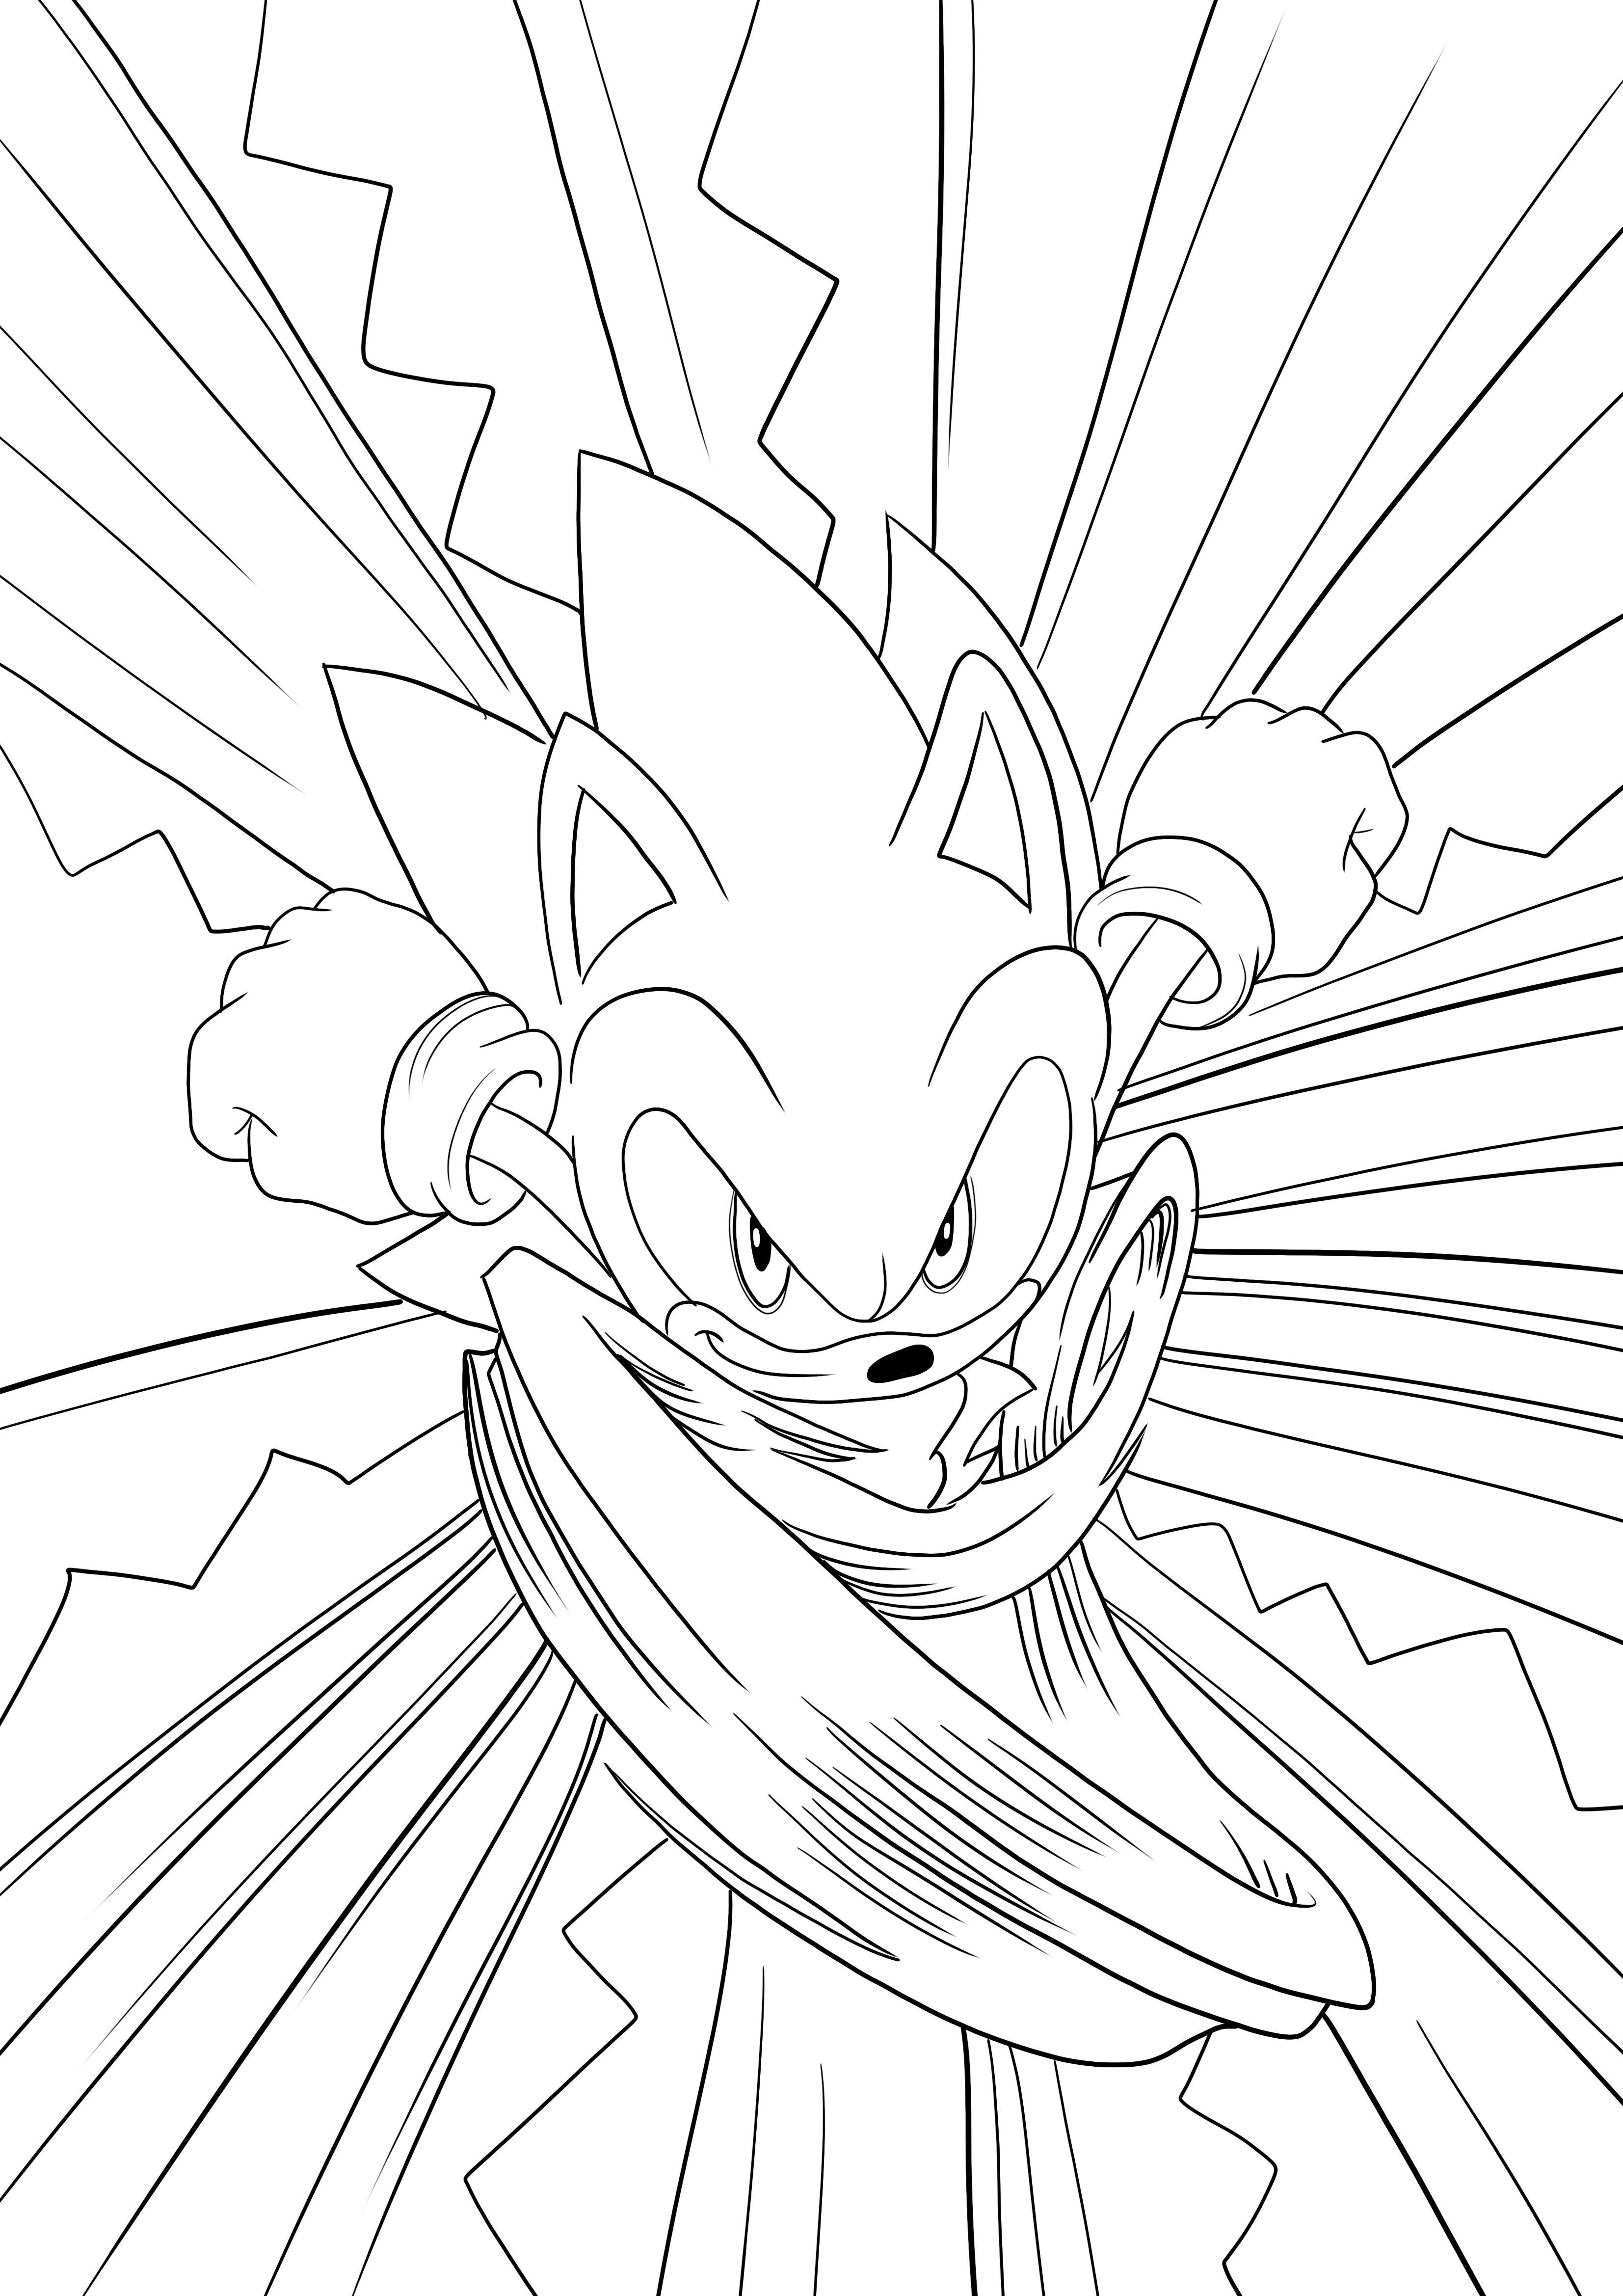 Furious and fast Sonic free downloading and coloring